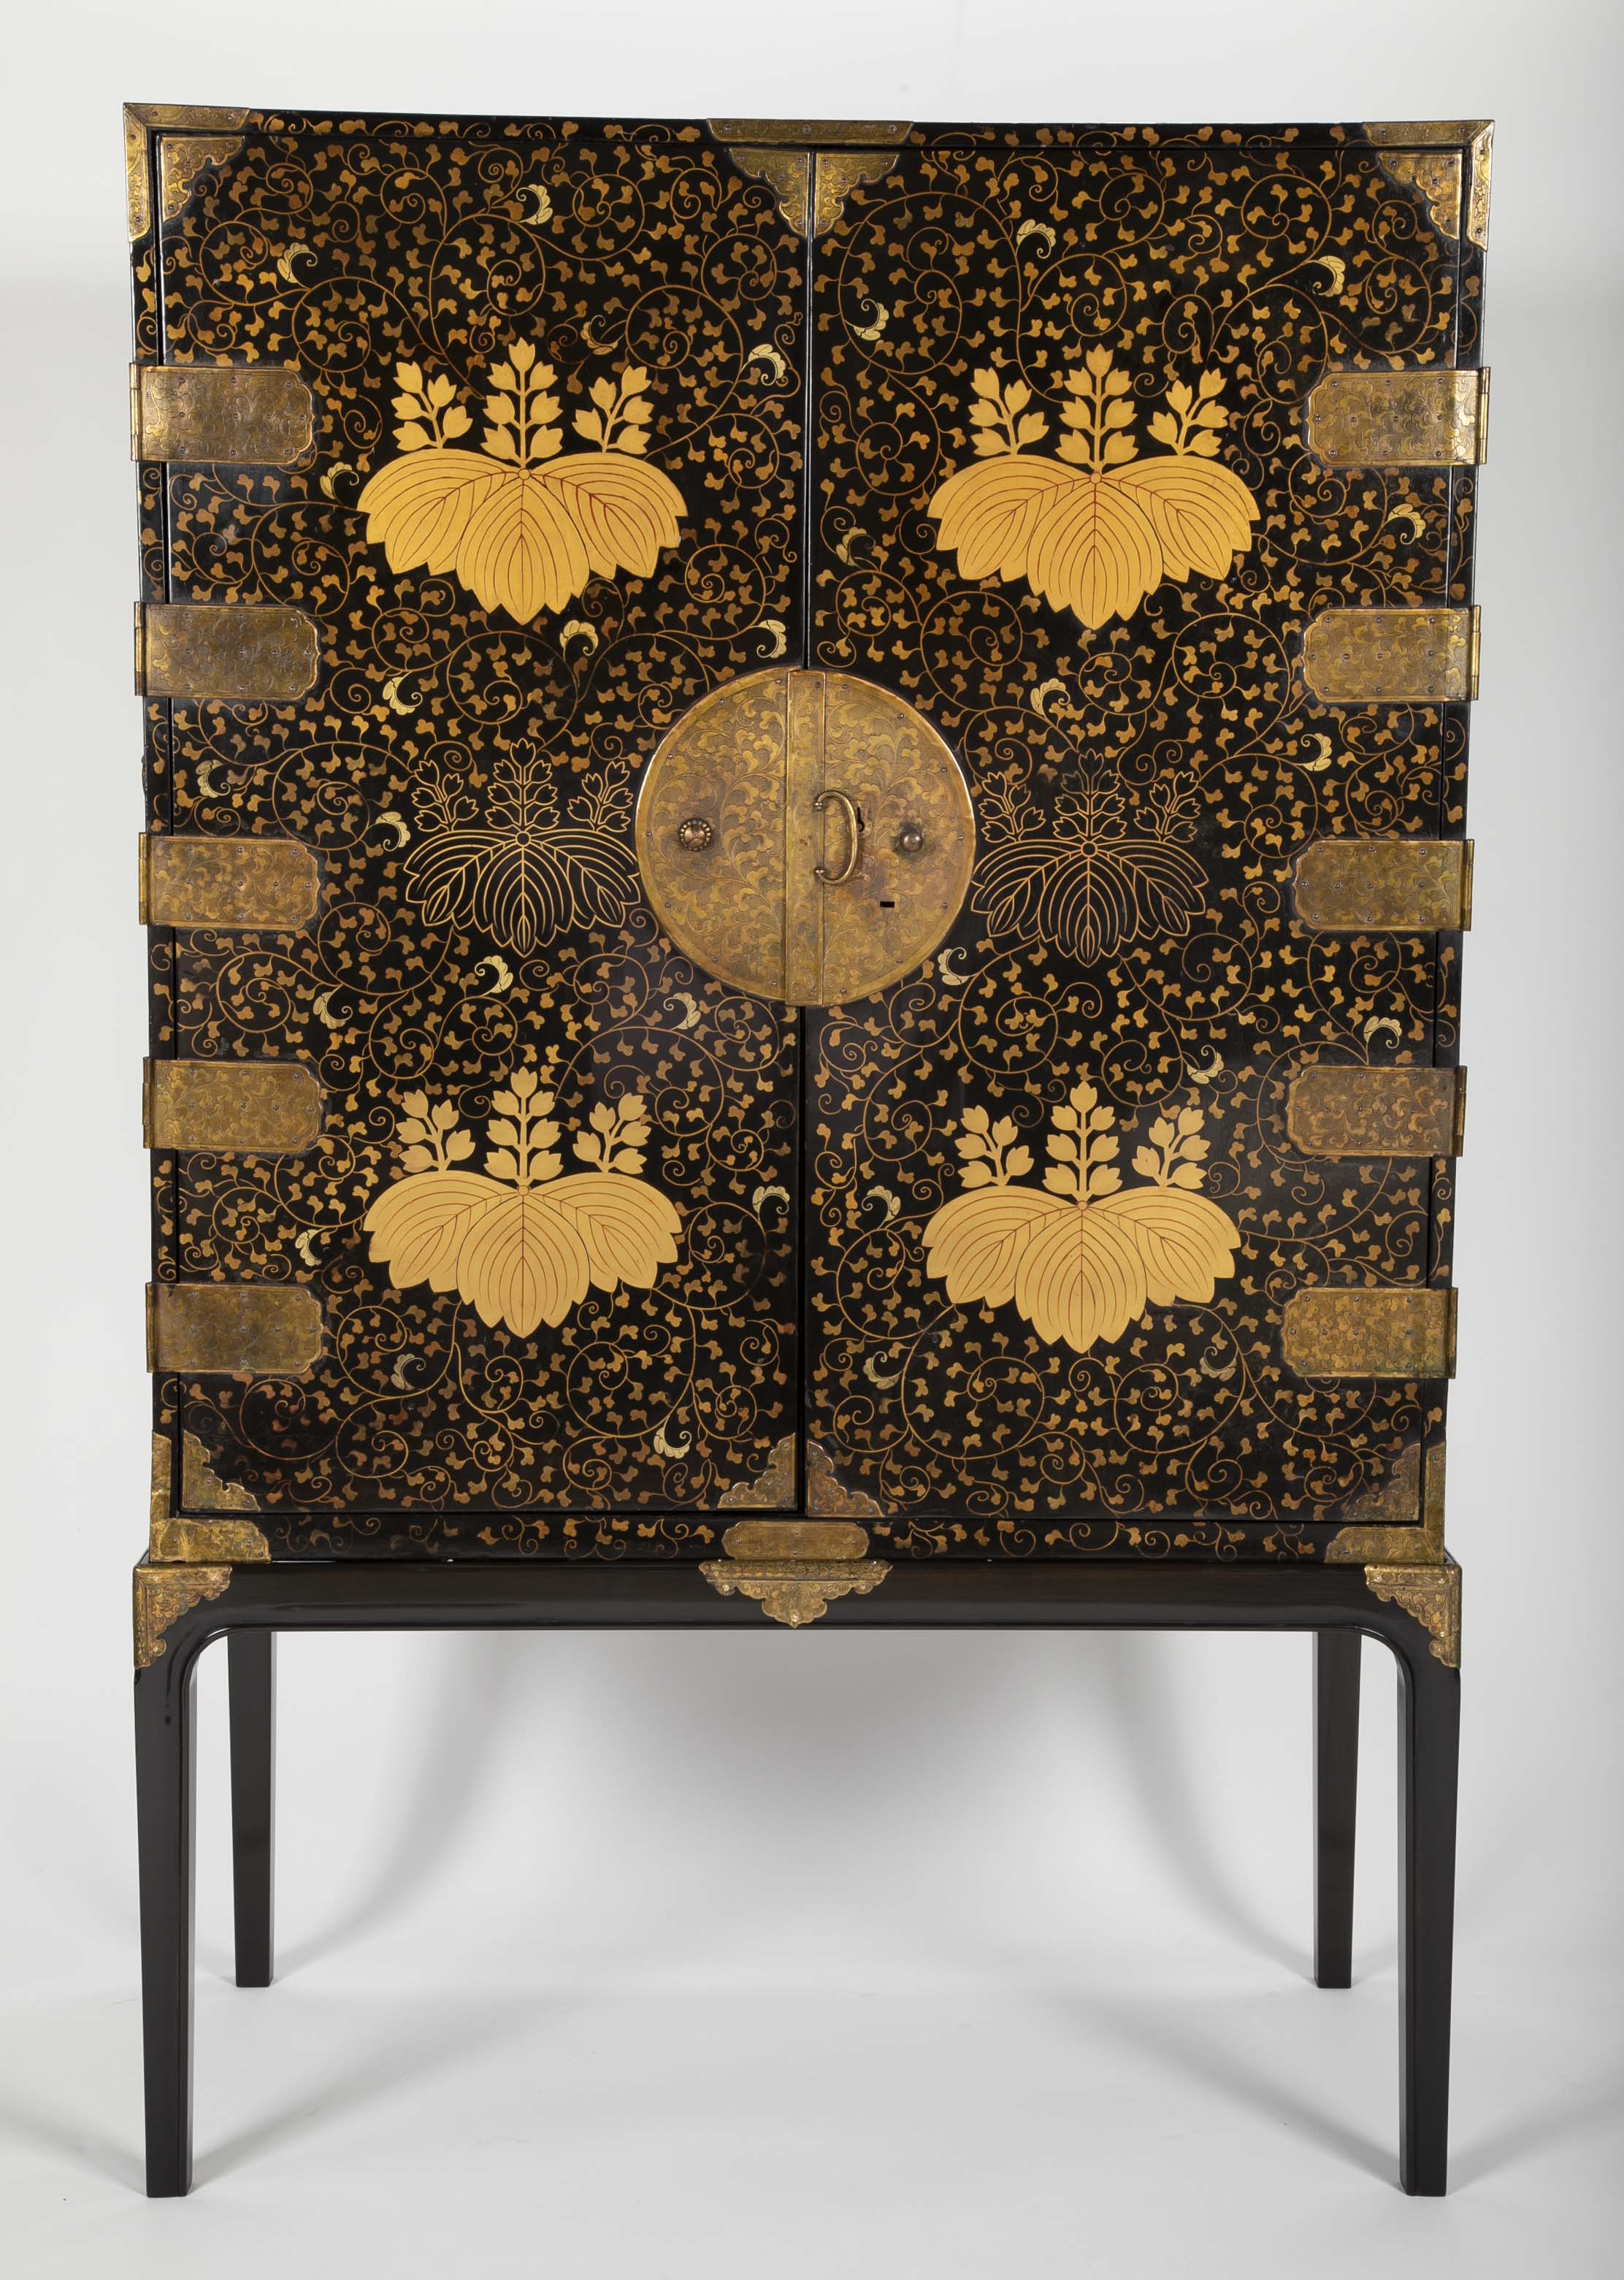 A Japanese Laquer Cabinet in picturial style